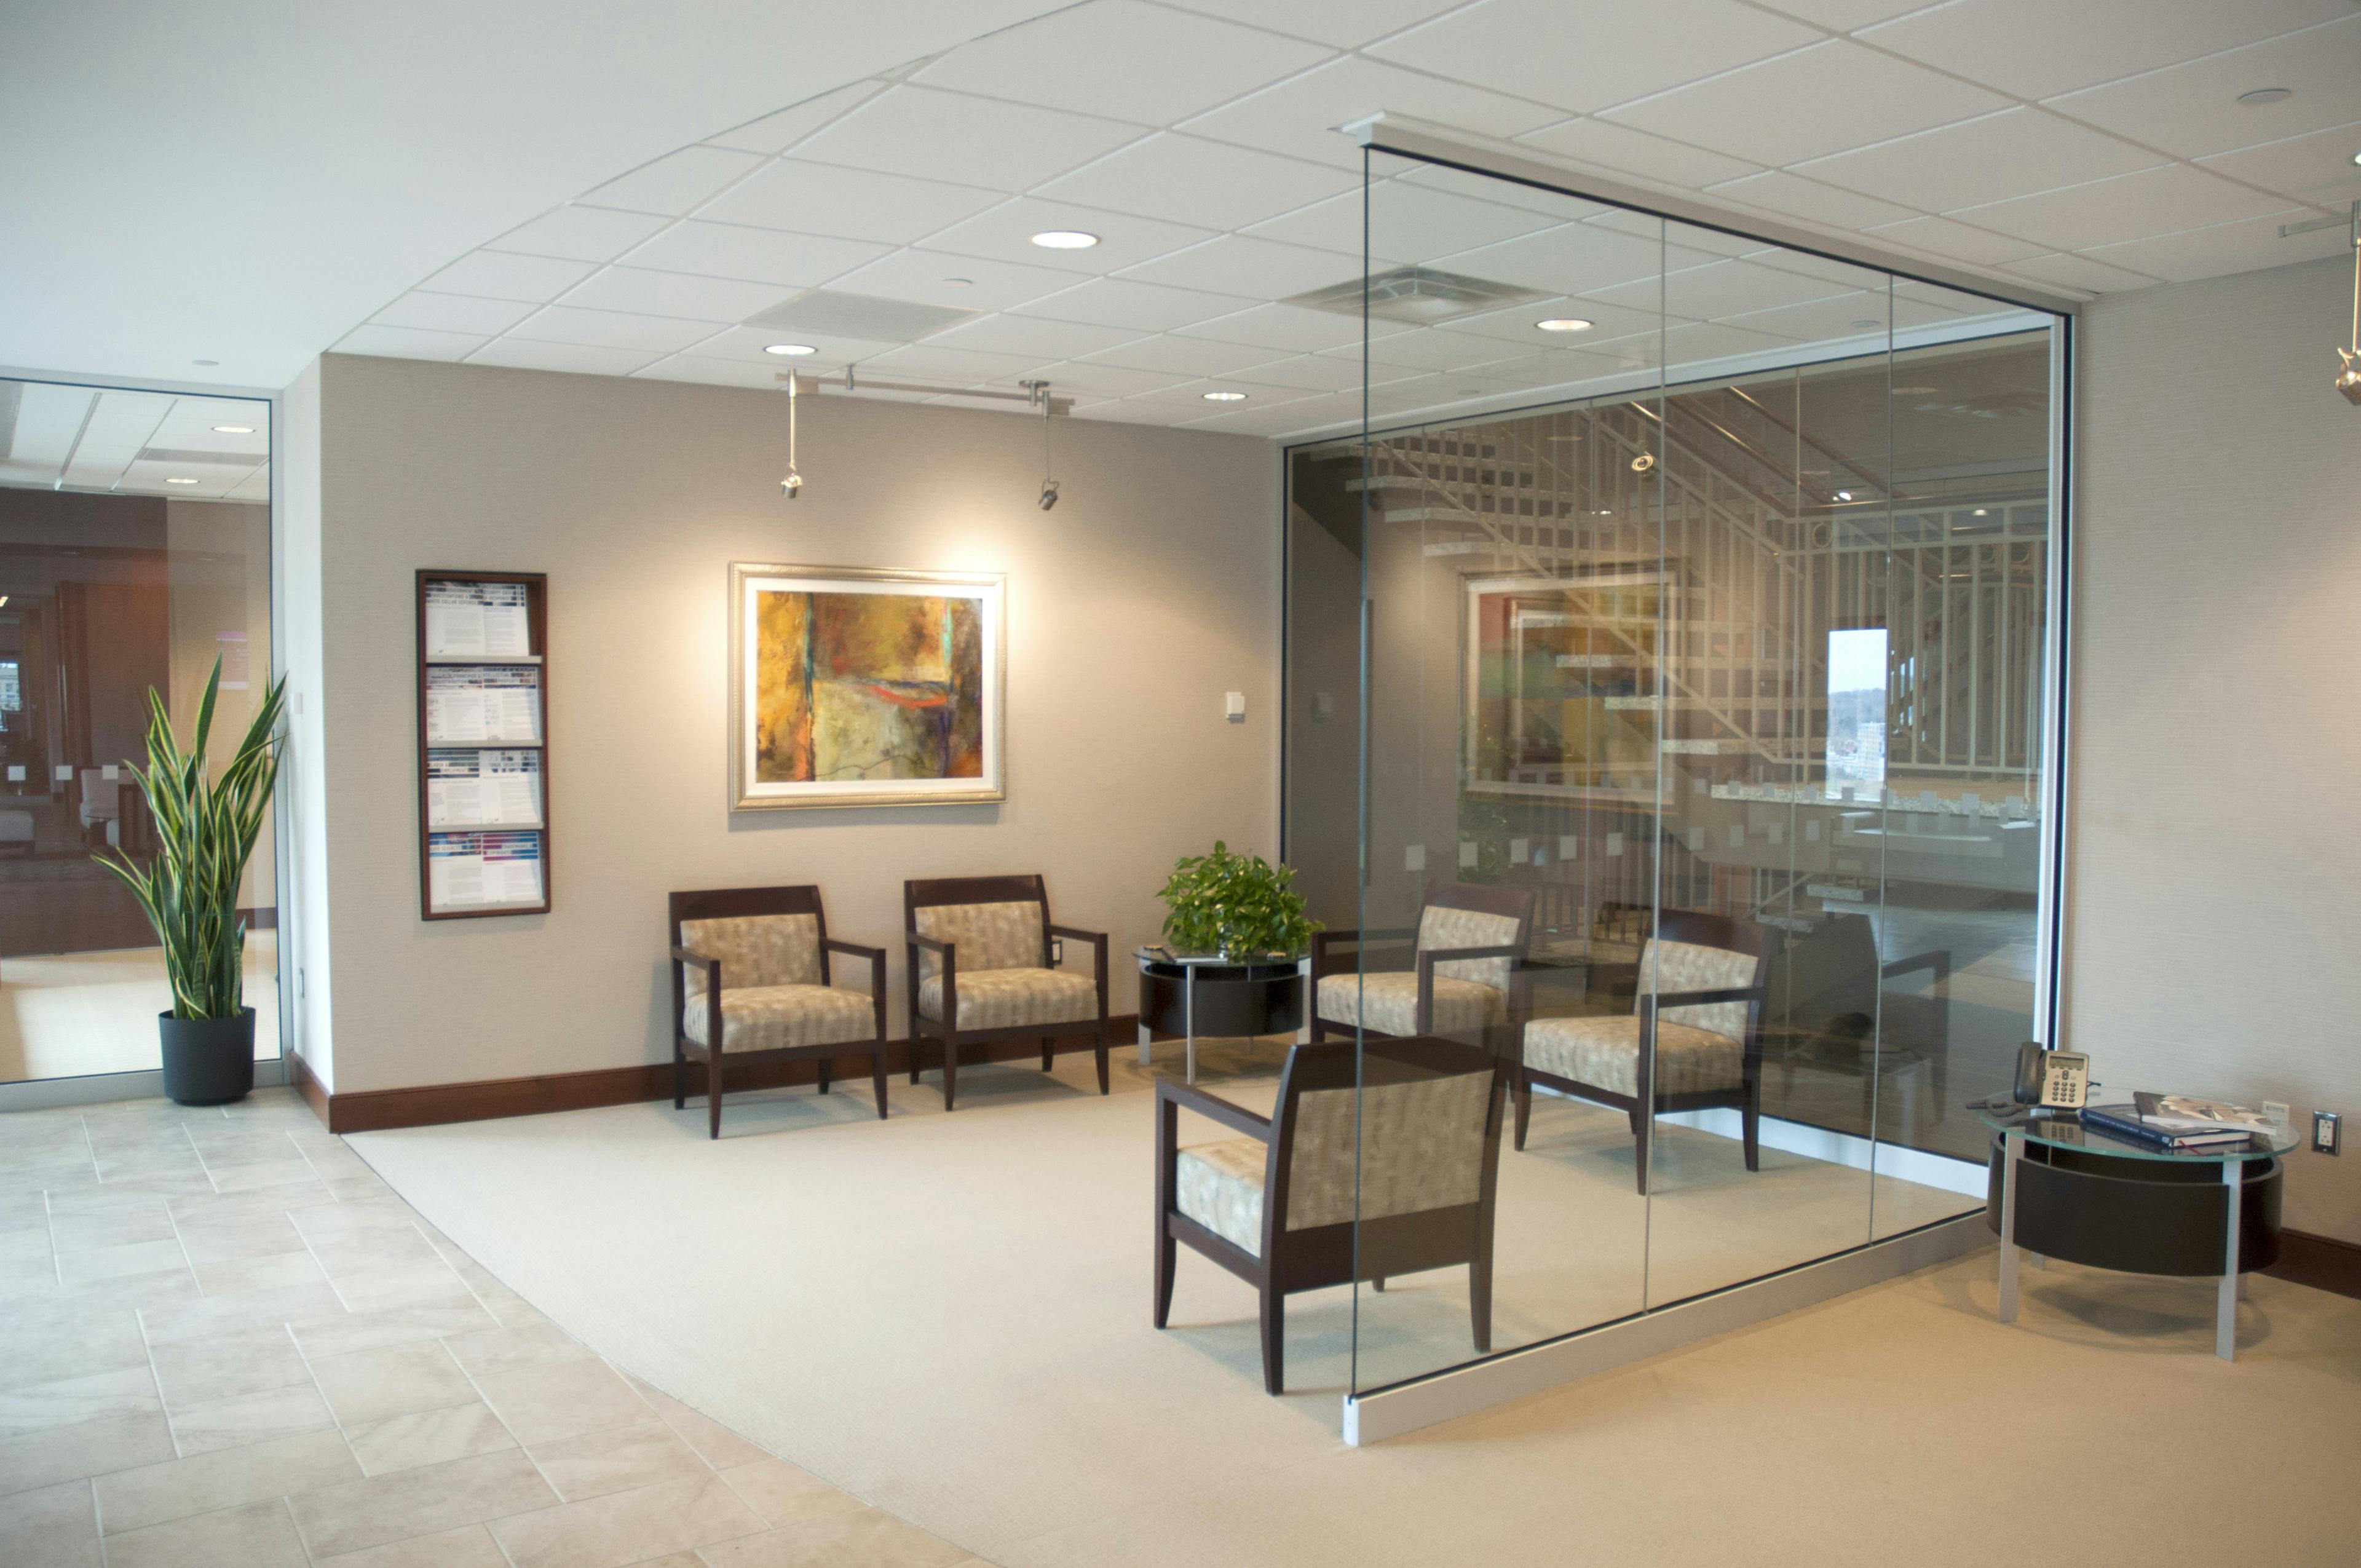 Reception seating area in Nixon Peabody's Rochester office; a small space, enclosed on three sides by two glass panels and one wall, contains five chairs and a small table on which is a plant; through one of the glass walls can be seen the office stairwell; a painting hangs on the wall, along with a rack of firm brochures